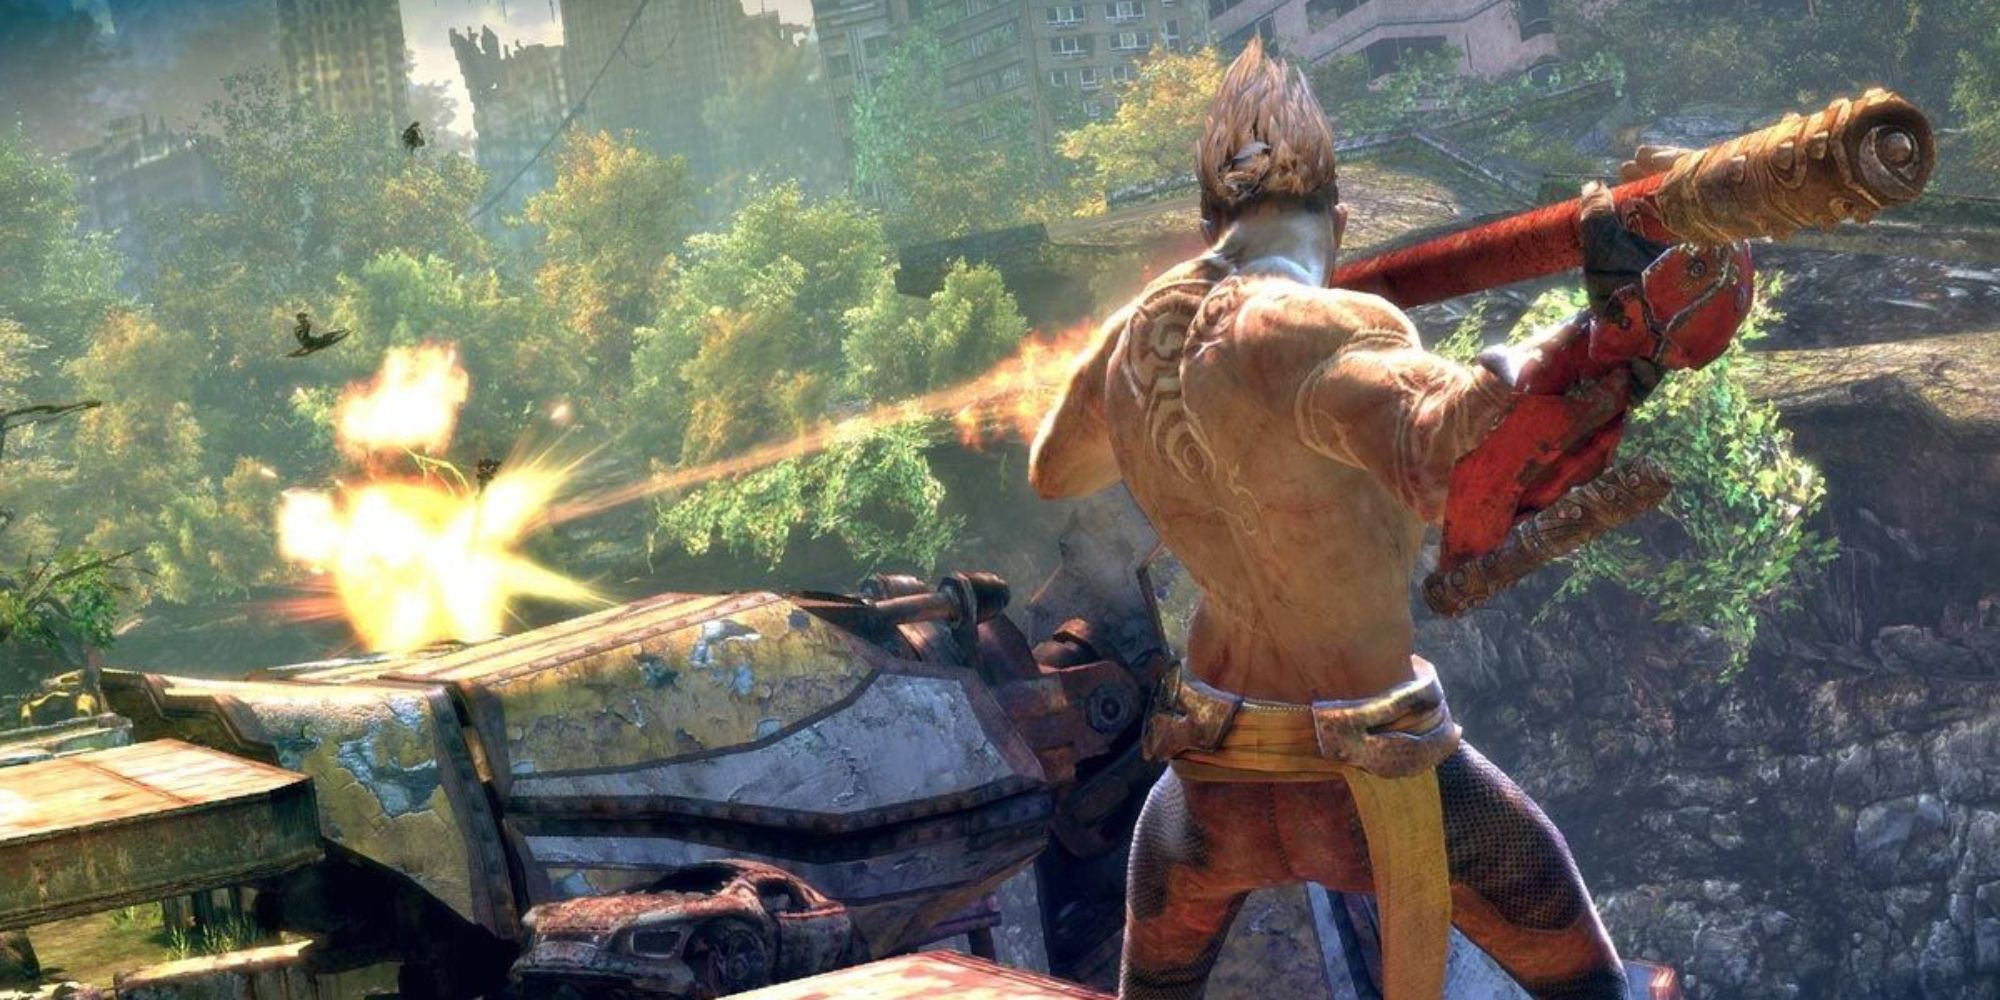 Enslaved Odyssey to the West Screenshot Of Monkey In Combat